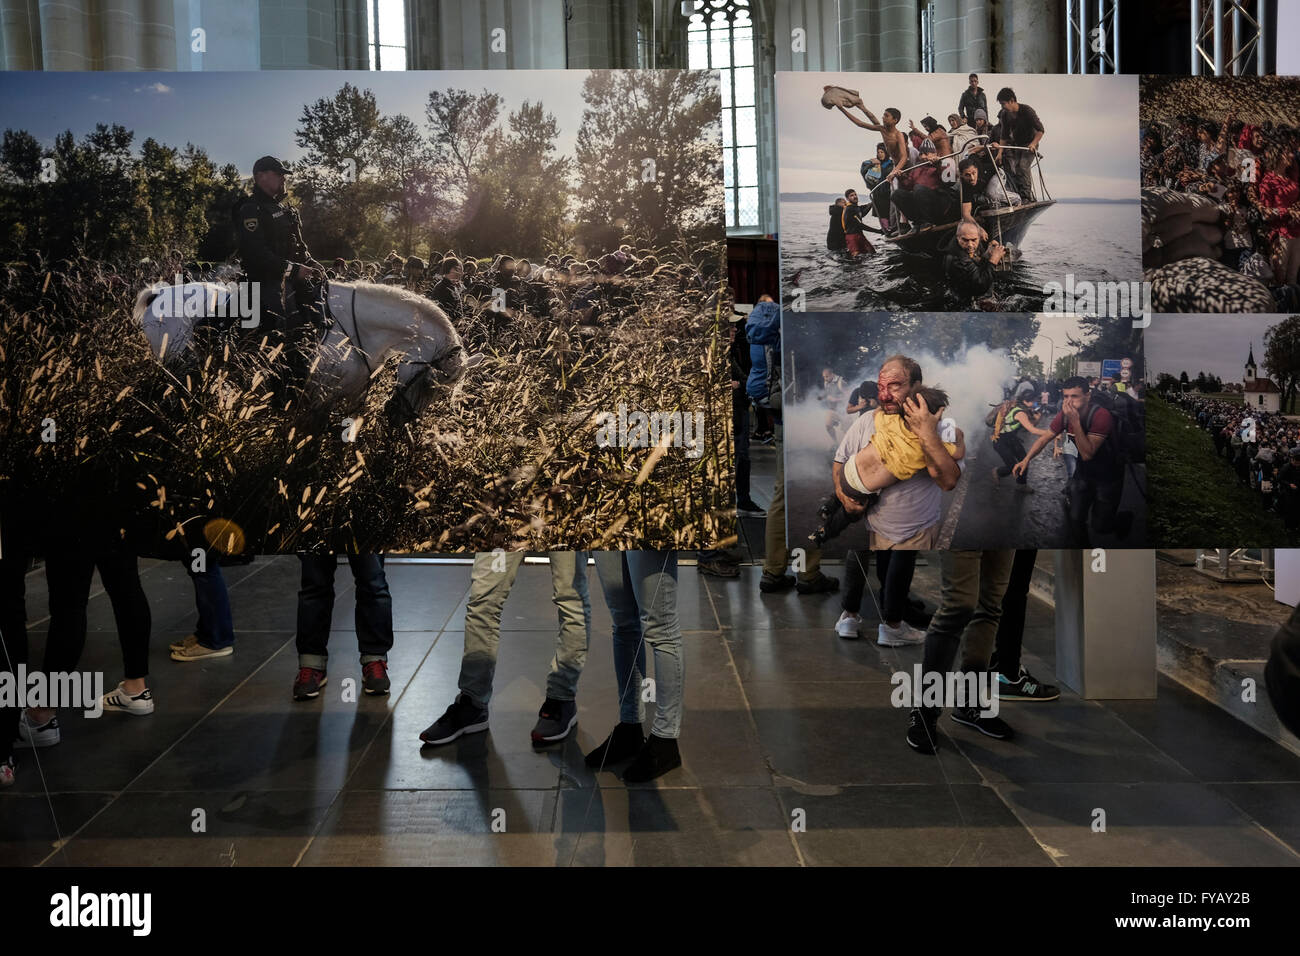 Visitors watching photos depicting refugee fleeing into Europe at the 2016 World Press Photo exhibition inside the Nieuwe Kerk a 15th-century church  located on Dam Square in Amsterdam Netherlands Stock Photo